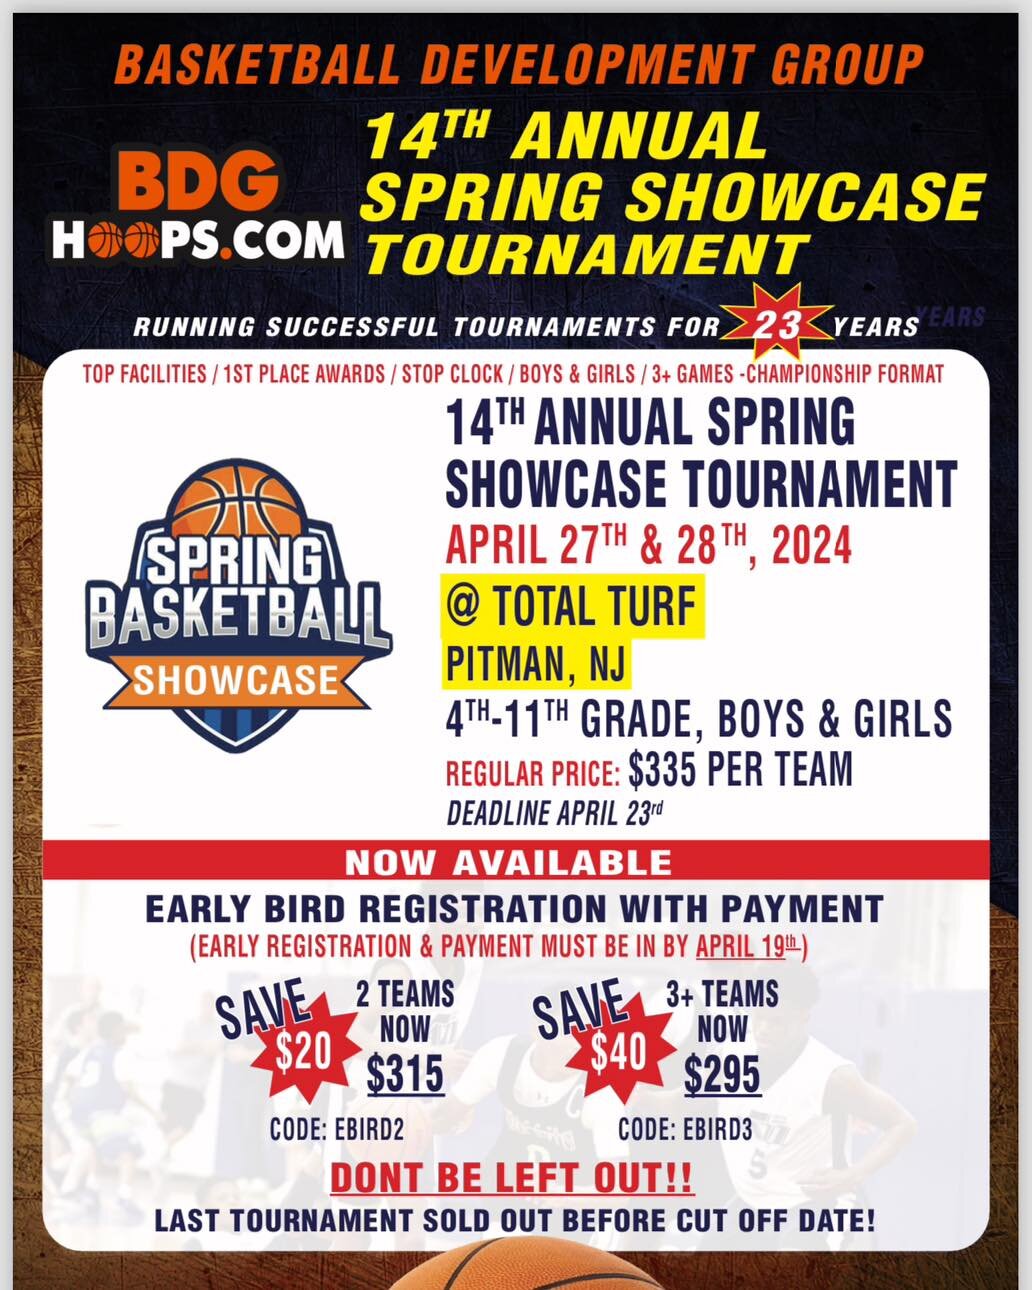 🔥DON&rsquo;T MISS OUT! IT WILL SELL OUT! REGISTER NOW AT WWW.BDGHOOPS.COM🔥